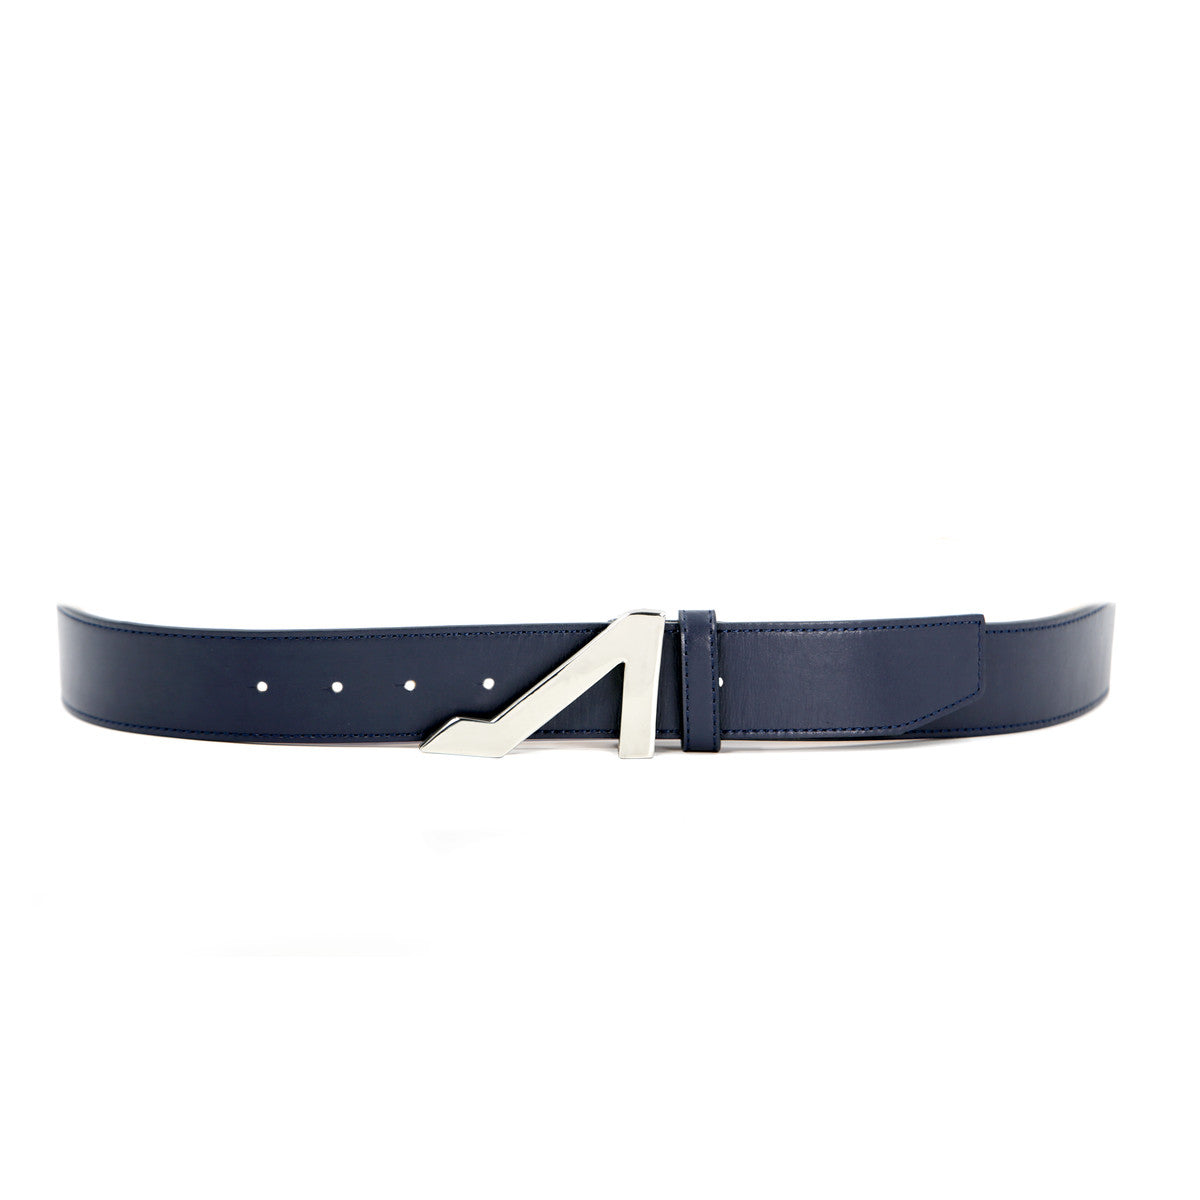 NAVY BLUE with NICKEL BUCKLE